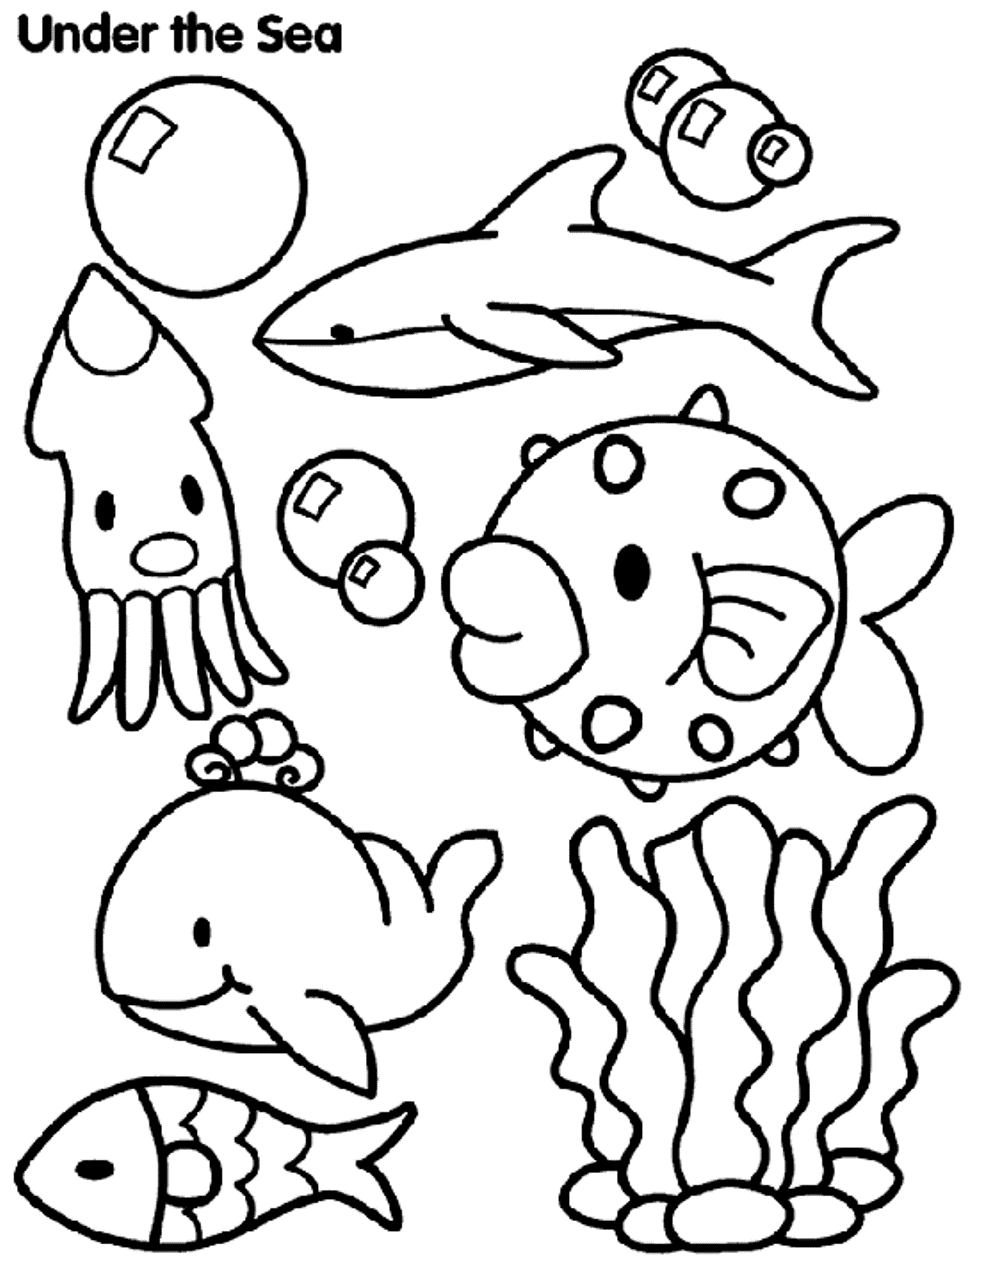 Download Under The Sea Coloring Pages Of Sea Animals Or Print ...